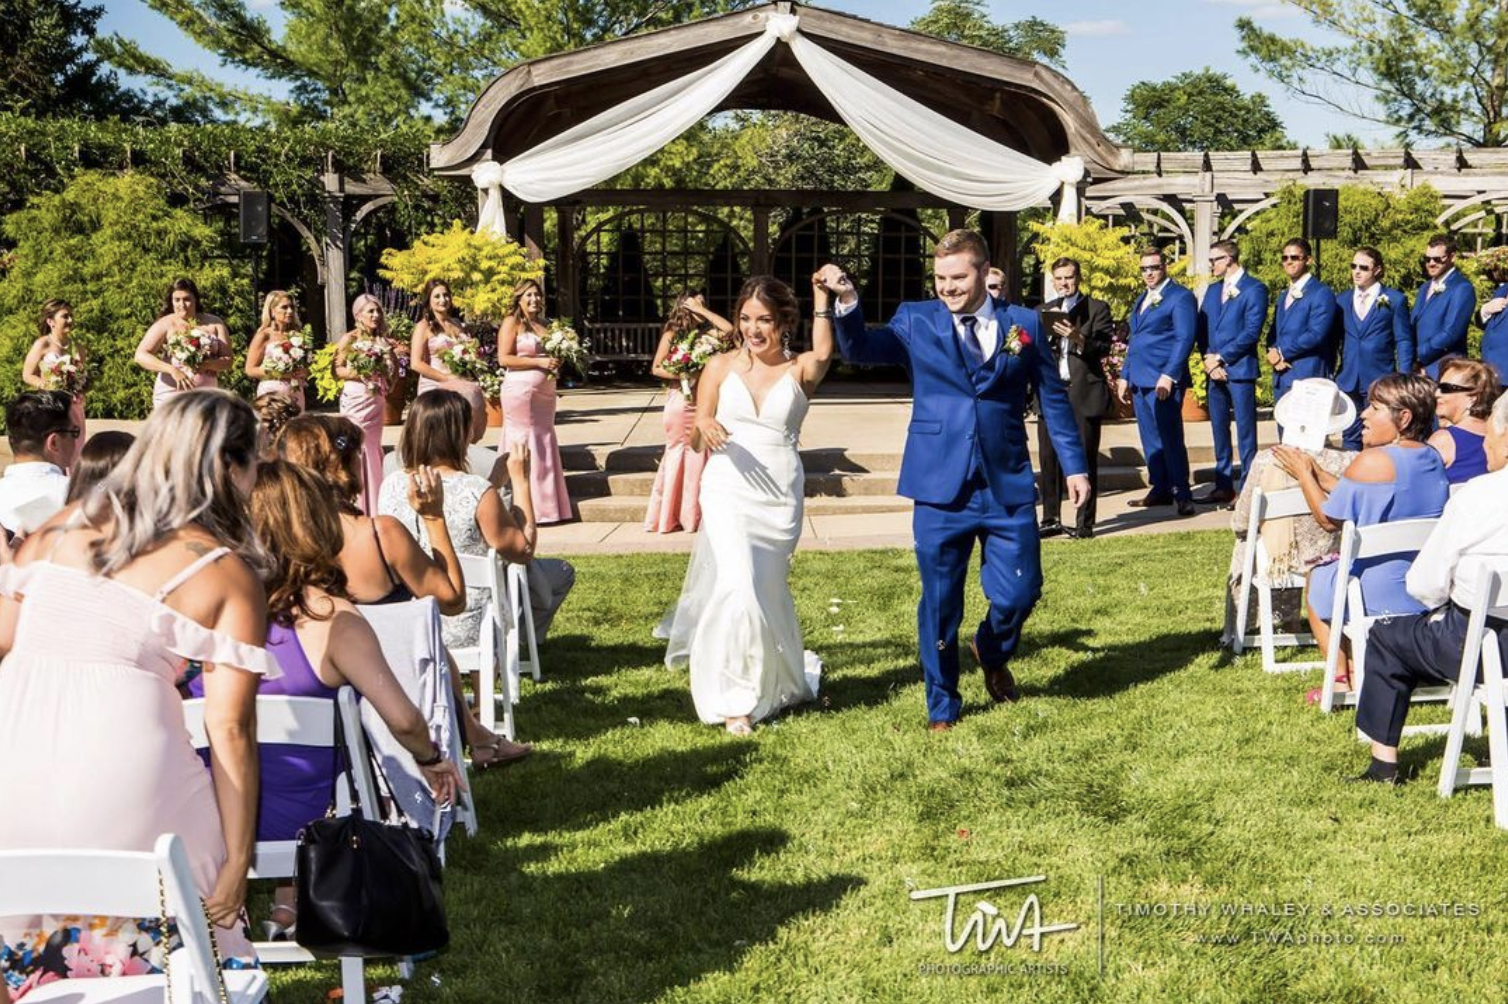 Bride and groom walk triumphantly back down the aisle after getting married